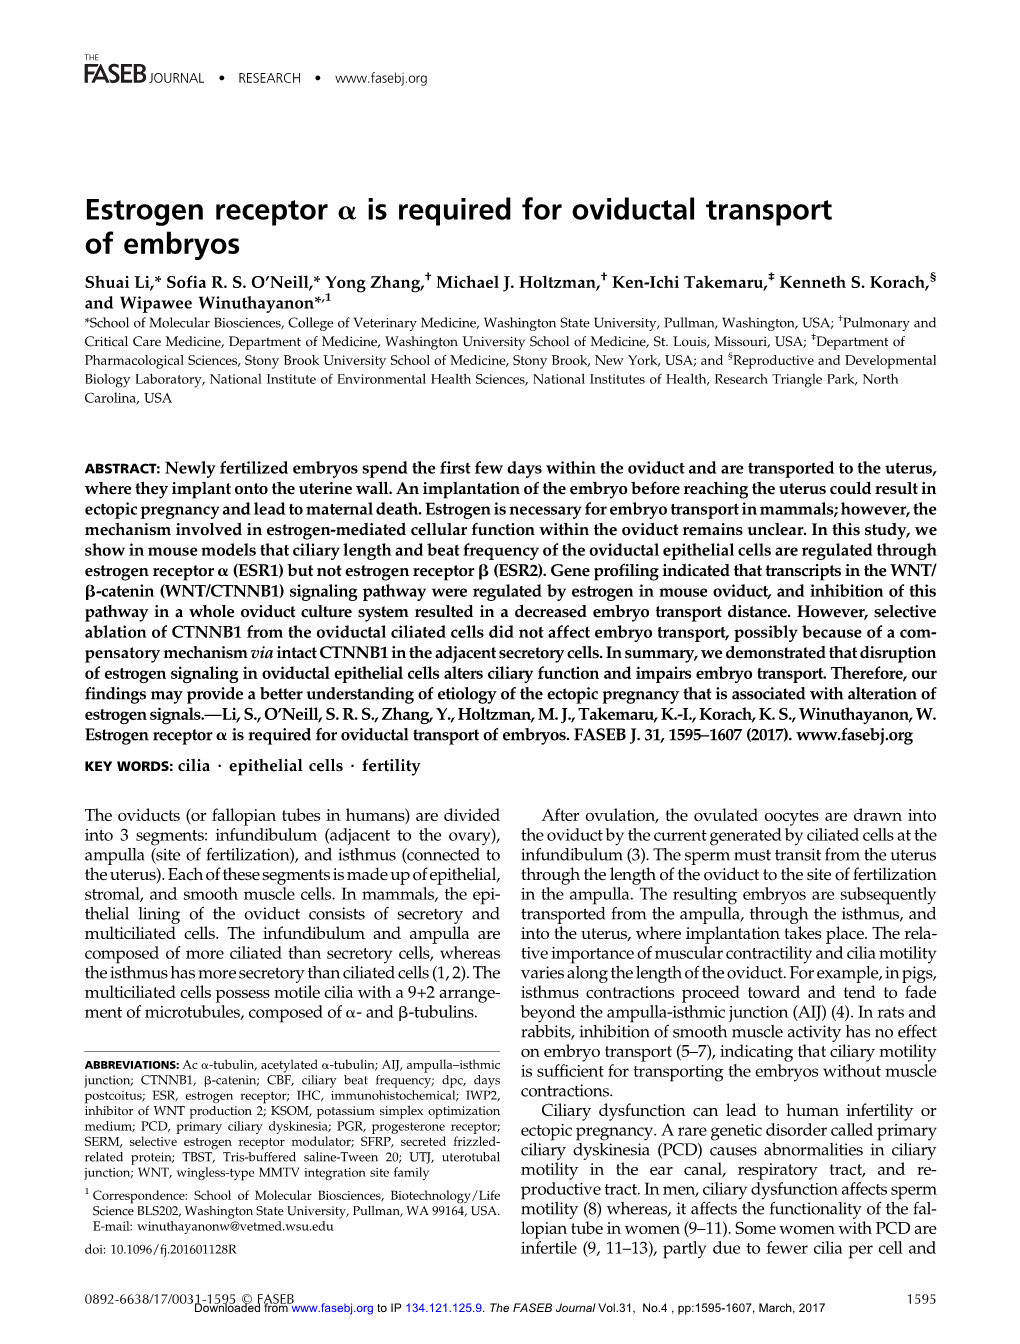 Estrogen Receptor Α Is Required for Oviductal Transport of Embryos